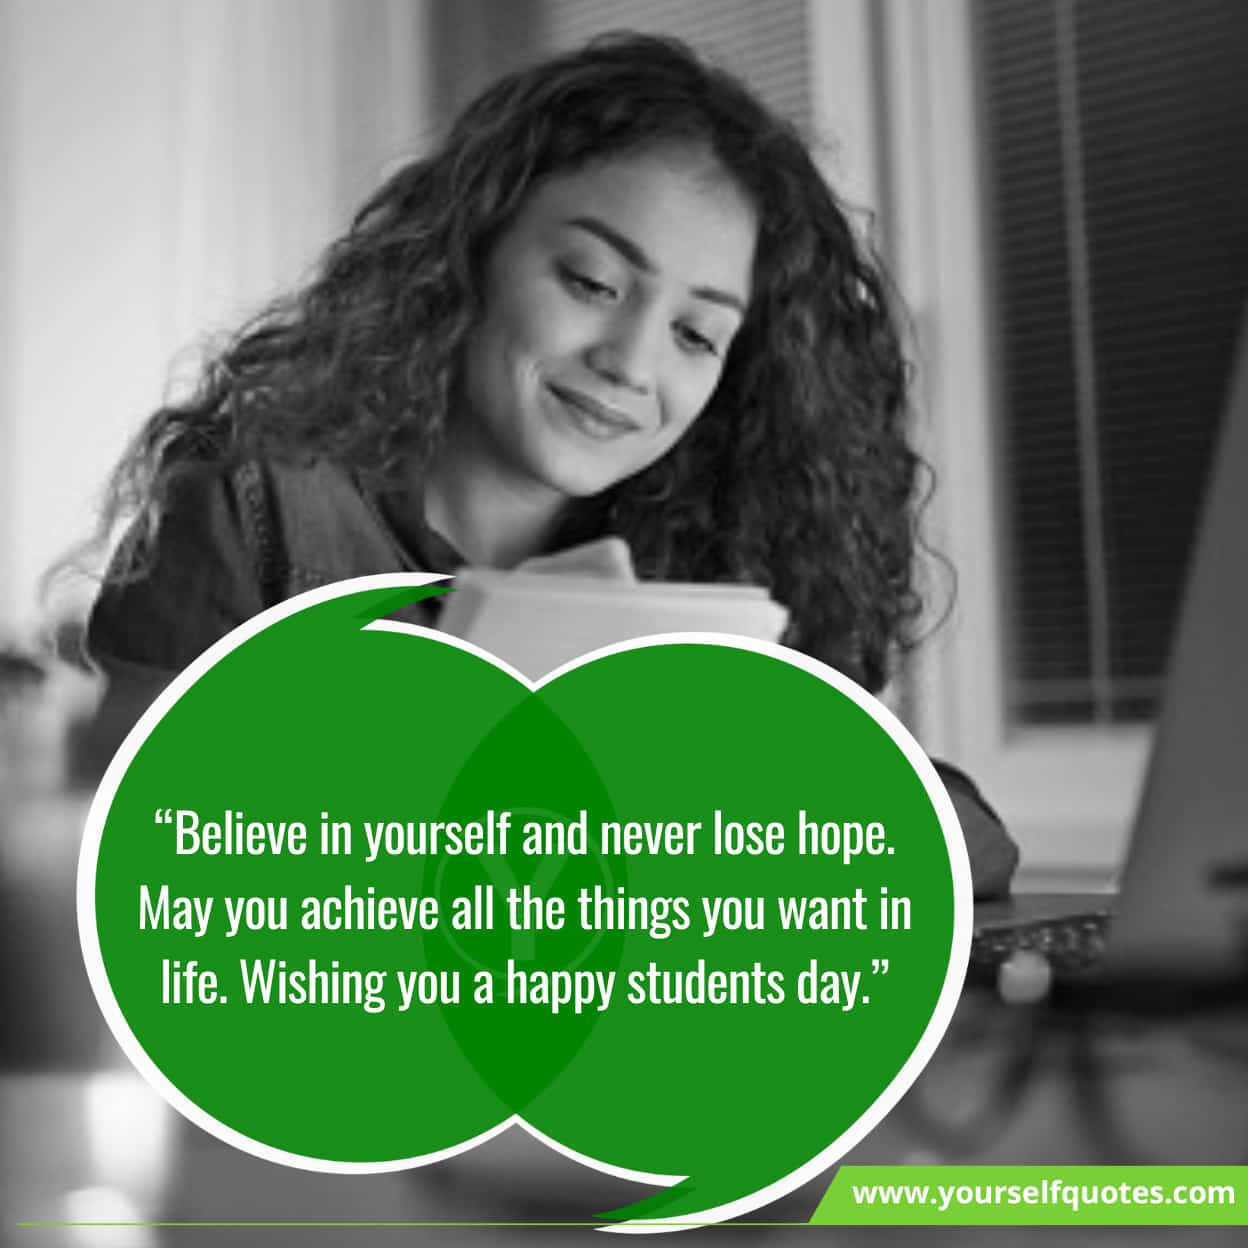 Cheerful Happy Students Day Inspirational Wishes